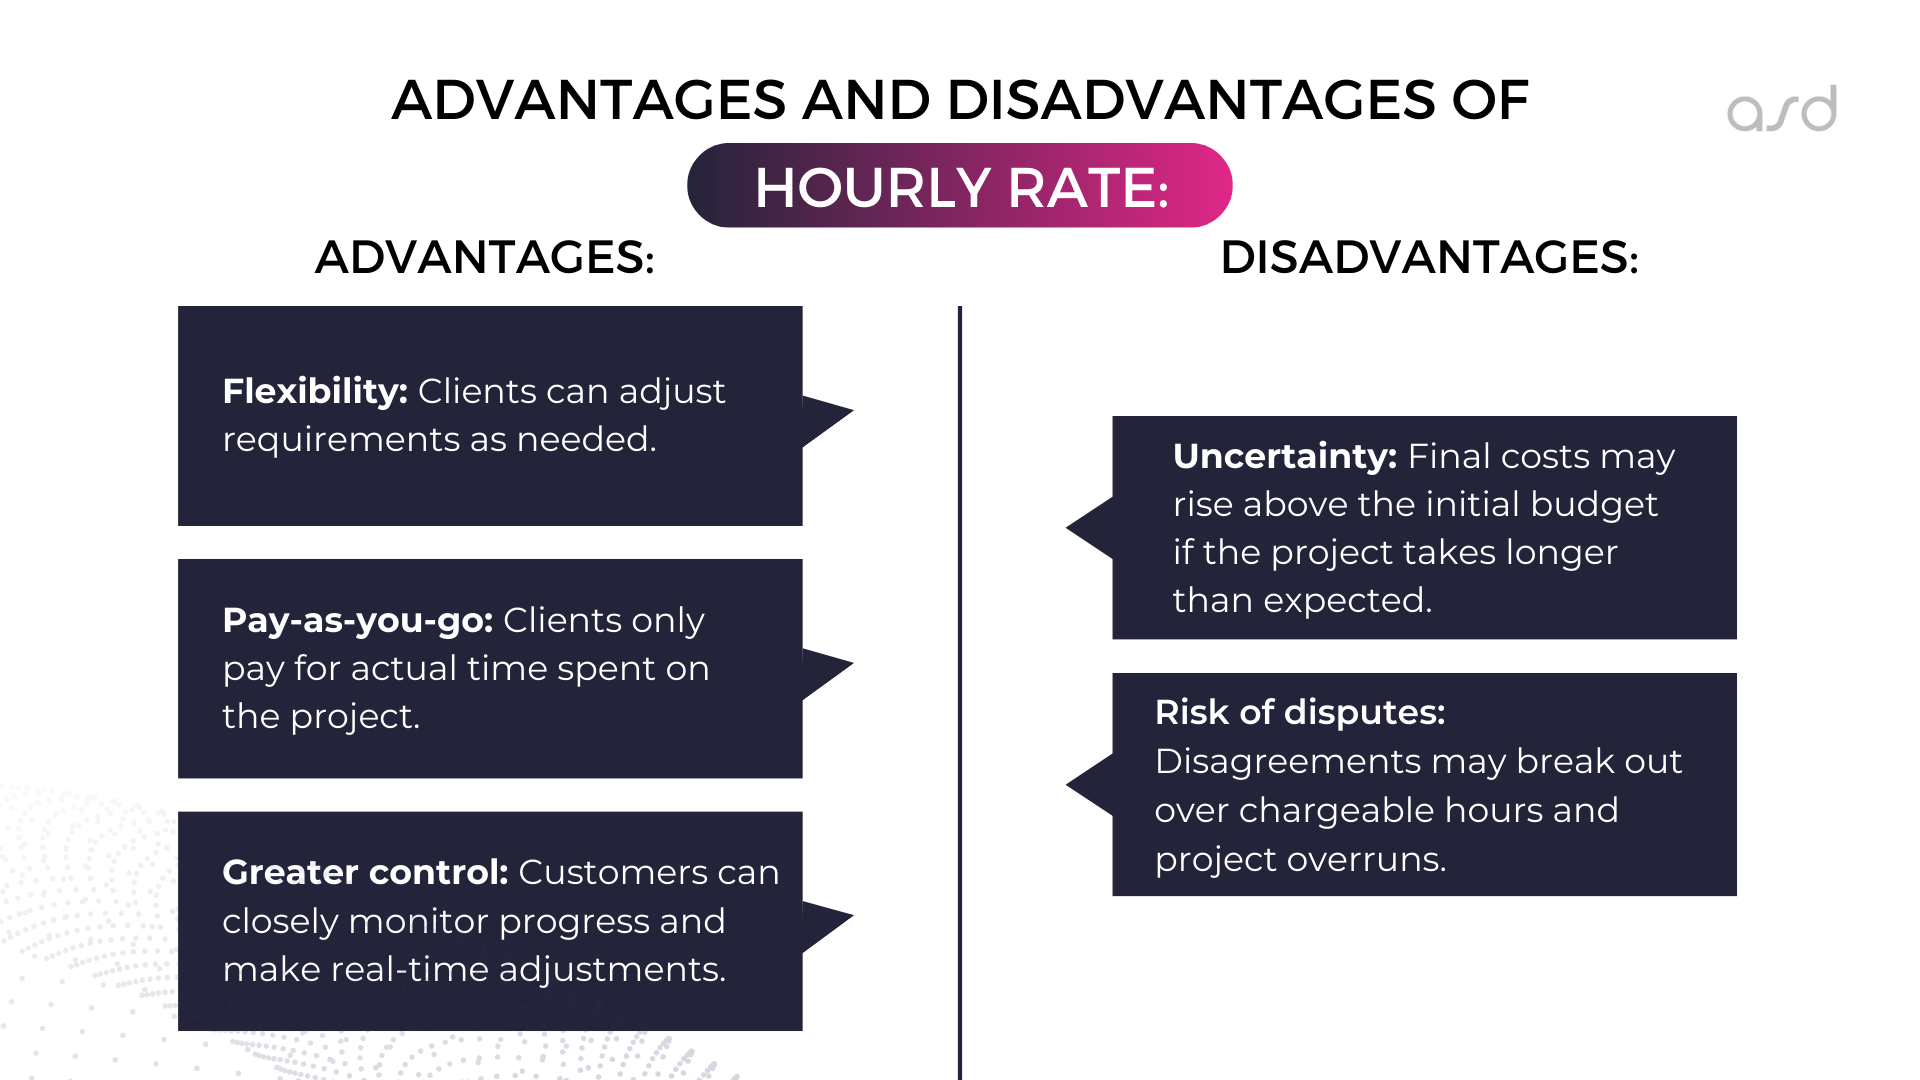 Advantages and Disadvantages of Hourly rate model